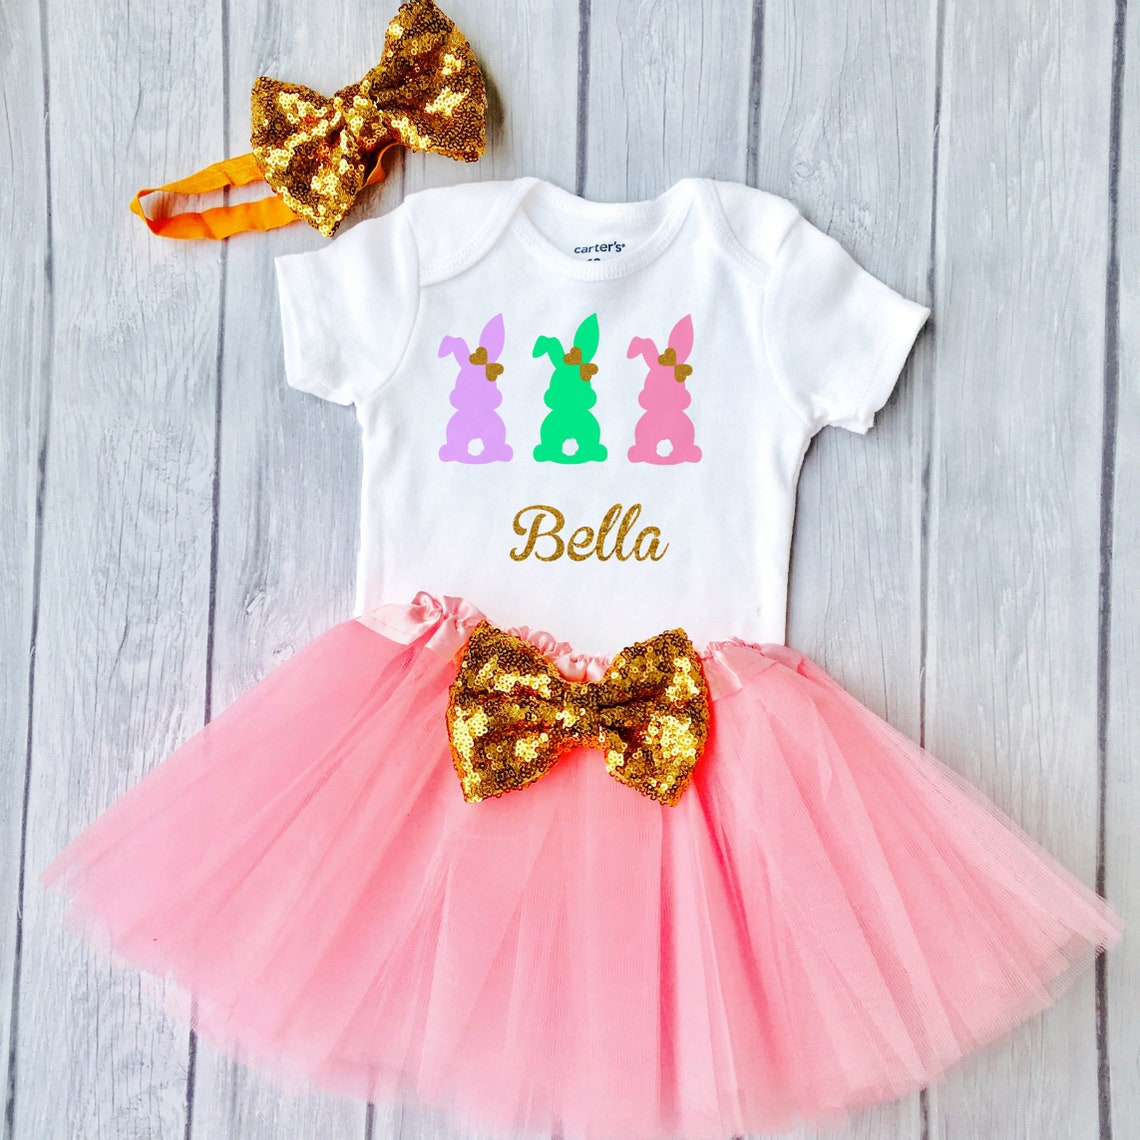 Toddler Girl Easter Outfit, Easter Outfit Baby Girl, My First Easter O ...